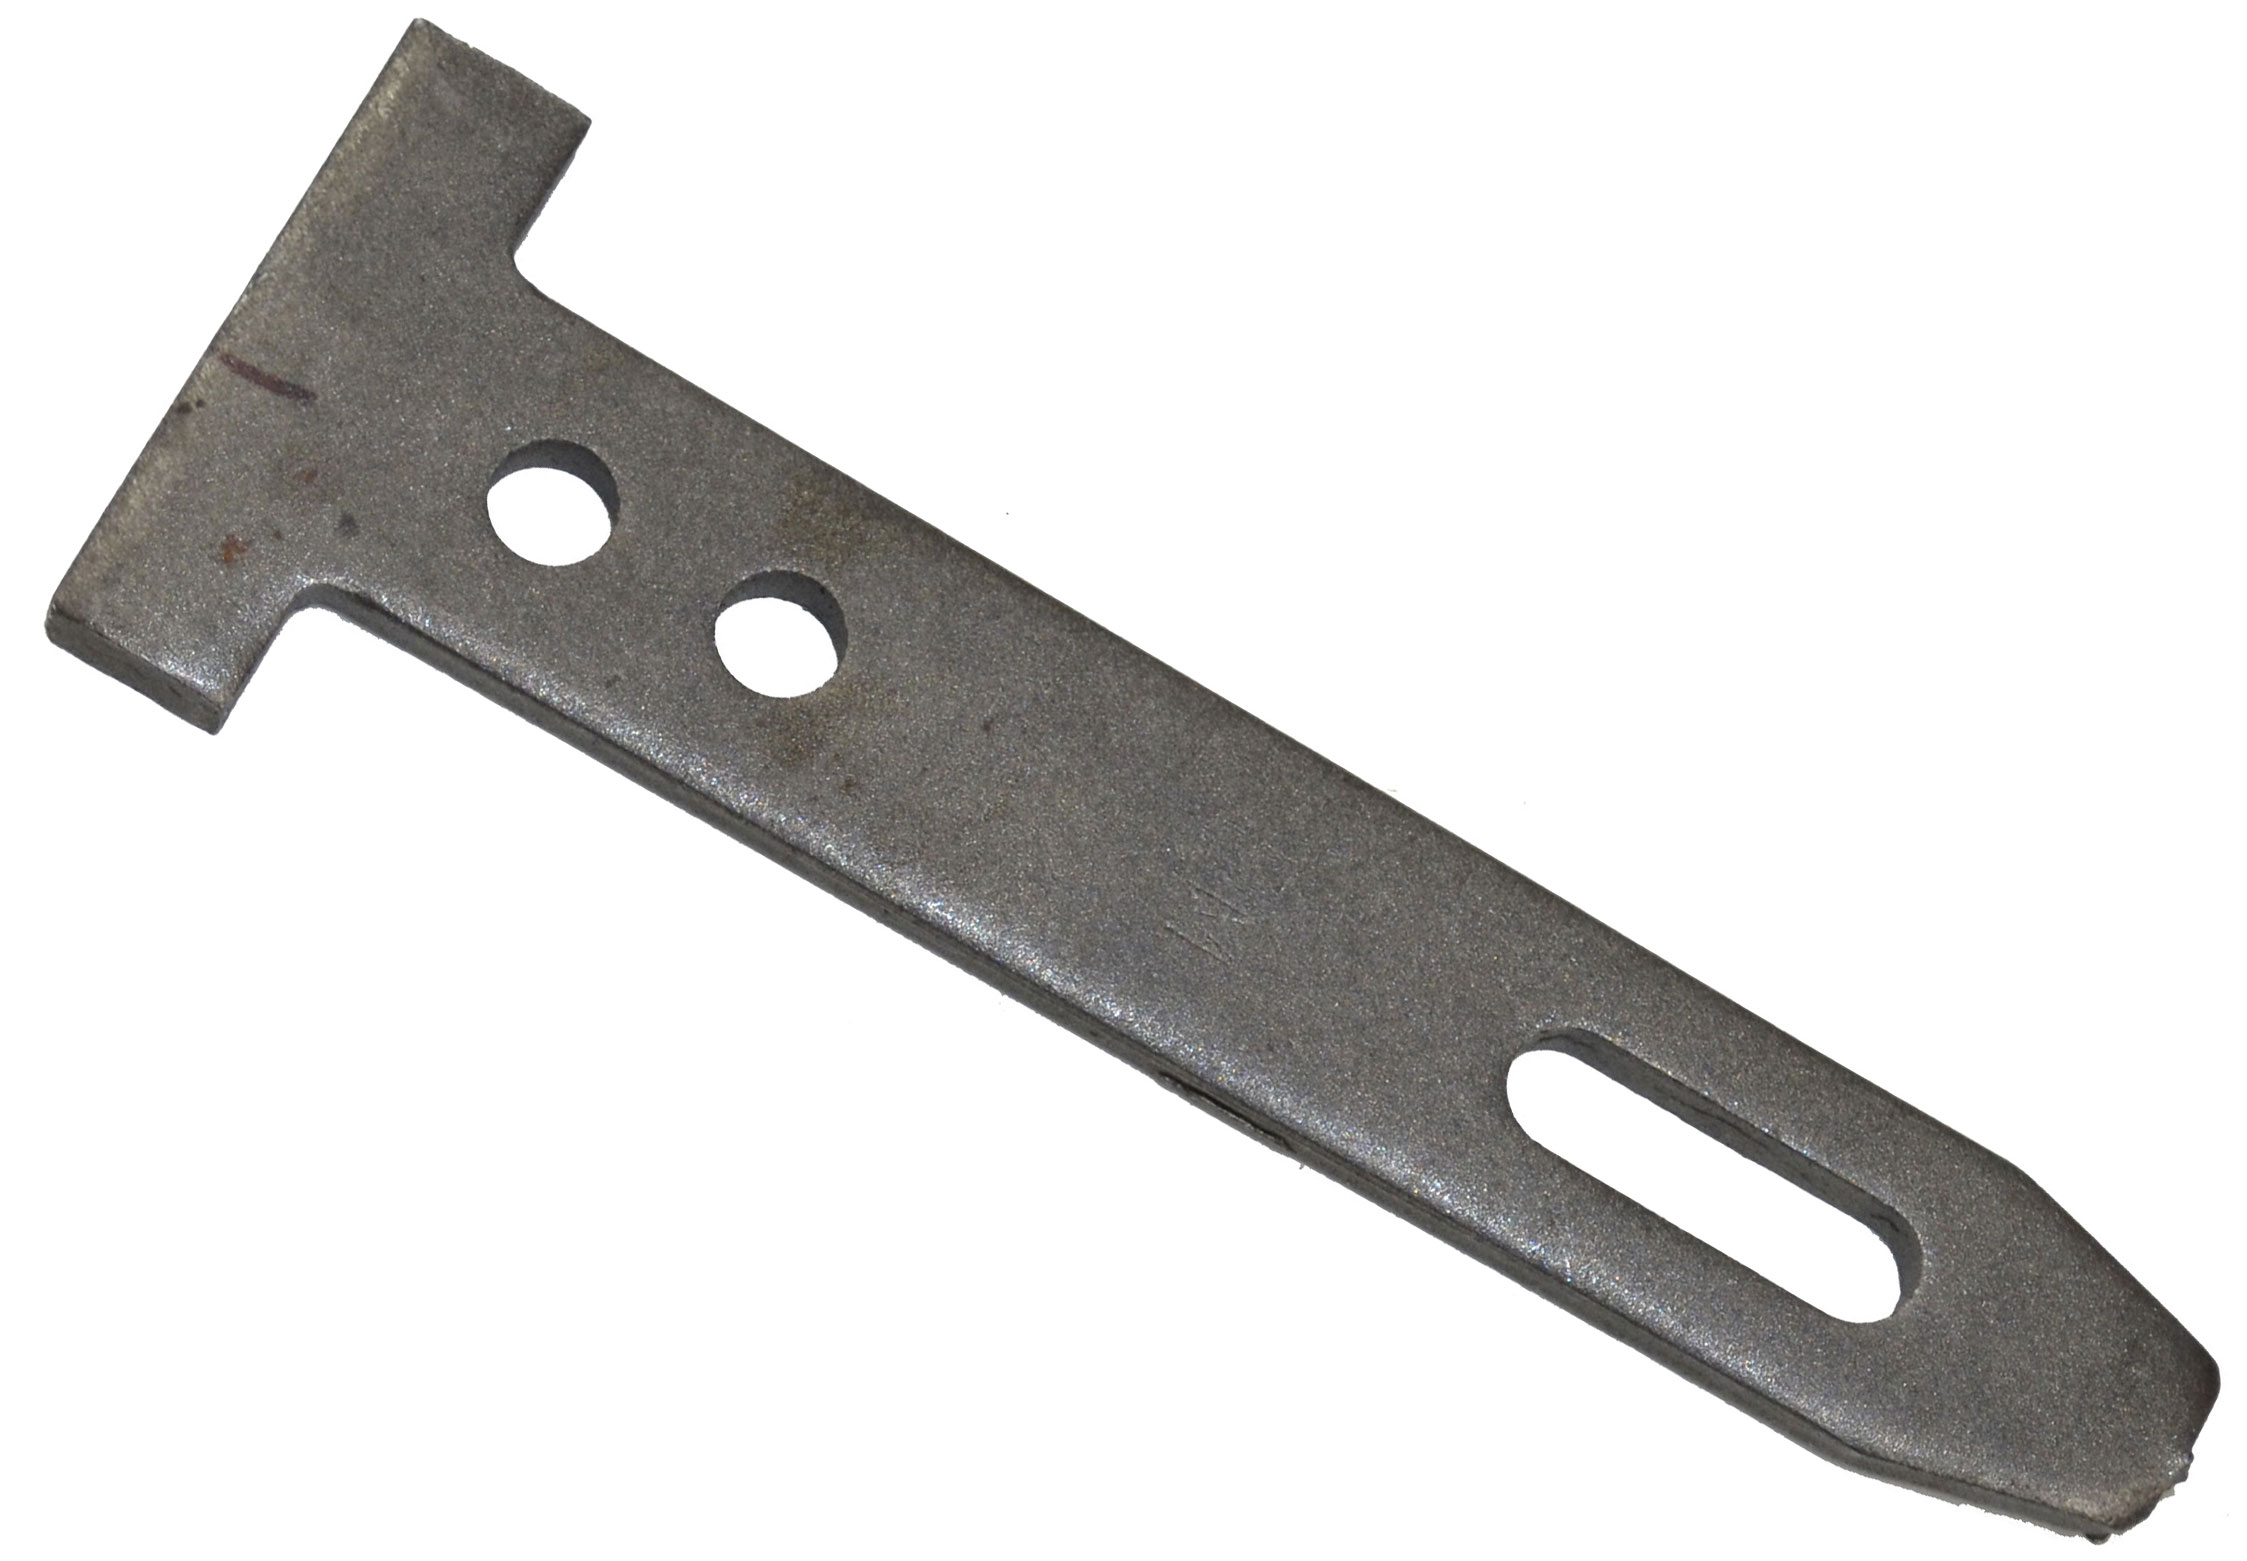 Long Wedge Bolt For Steel Ply - Utility and Pocket Knives